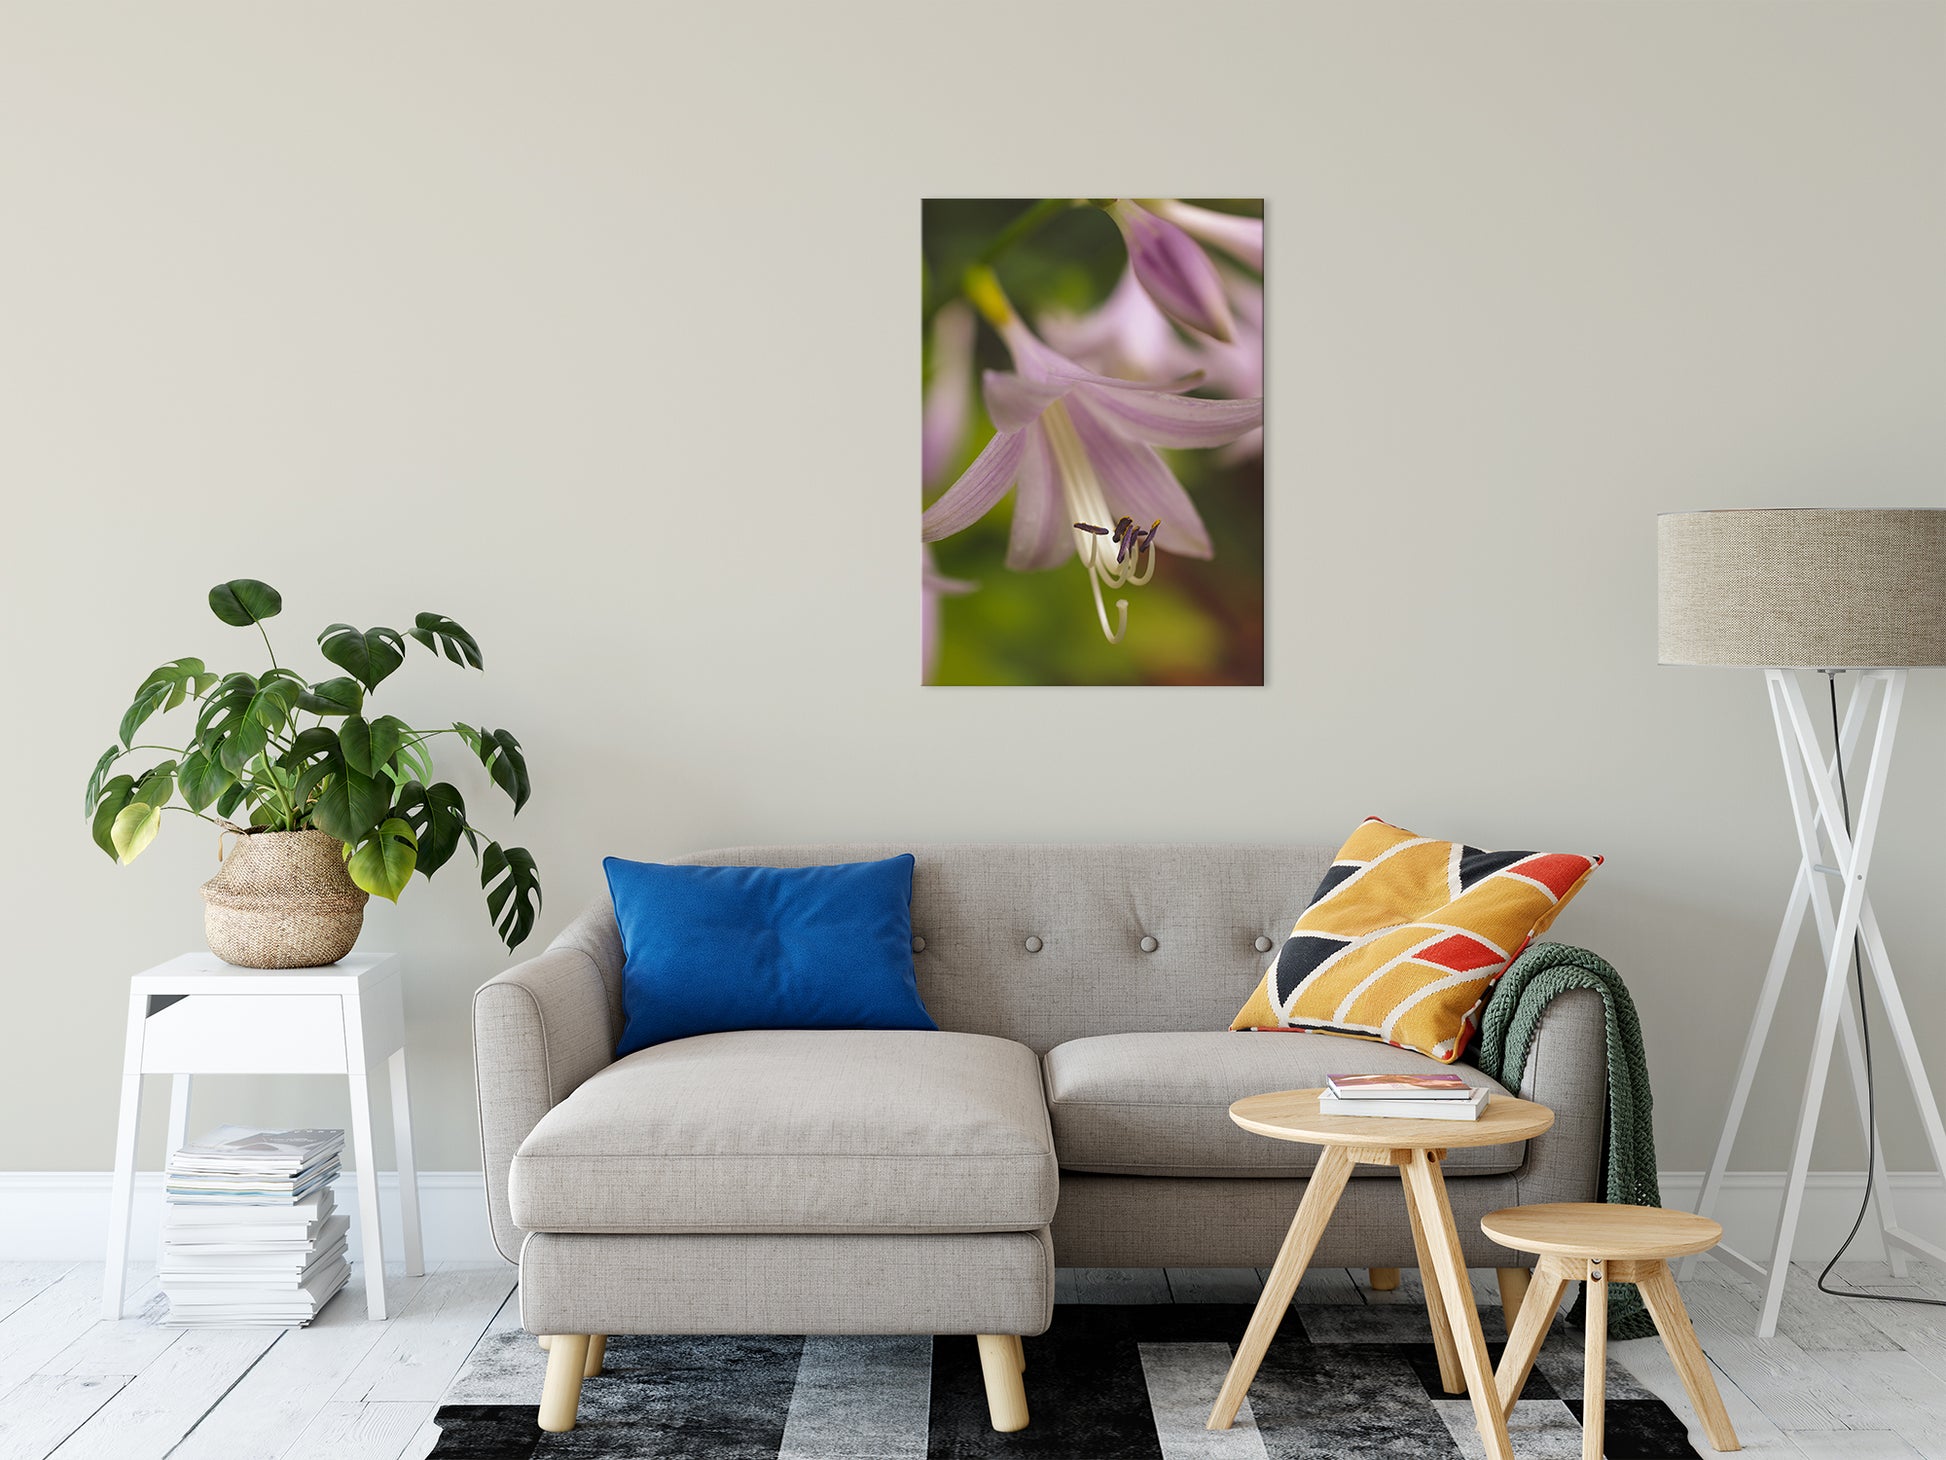 Close-up Hosta Bloom Nature / Floral Photo Fine Art Canvas Wall Art Prints 24" x 36" - PIPAFINEART